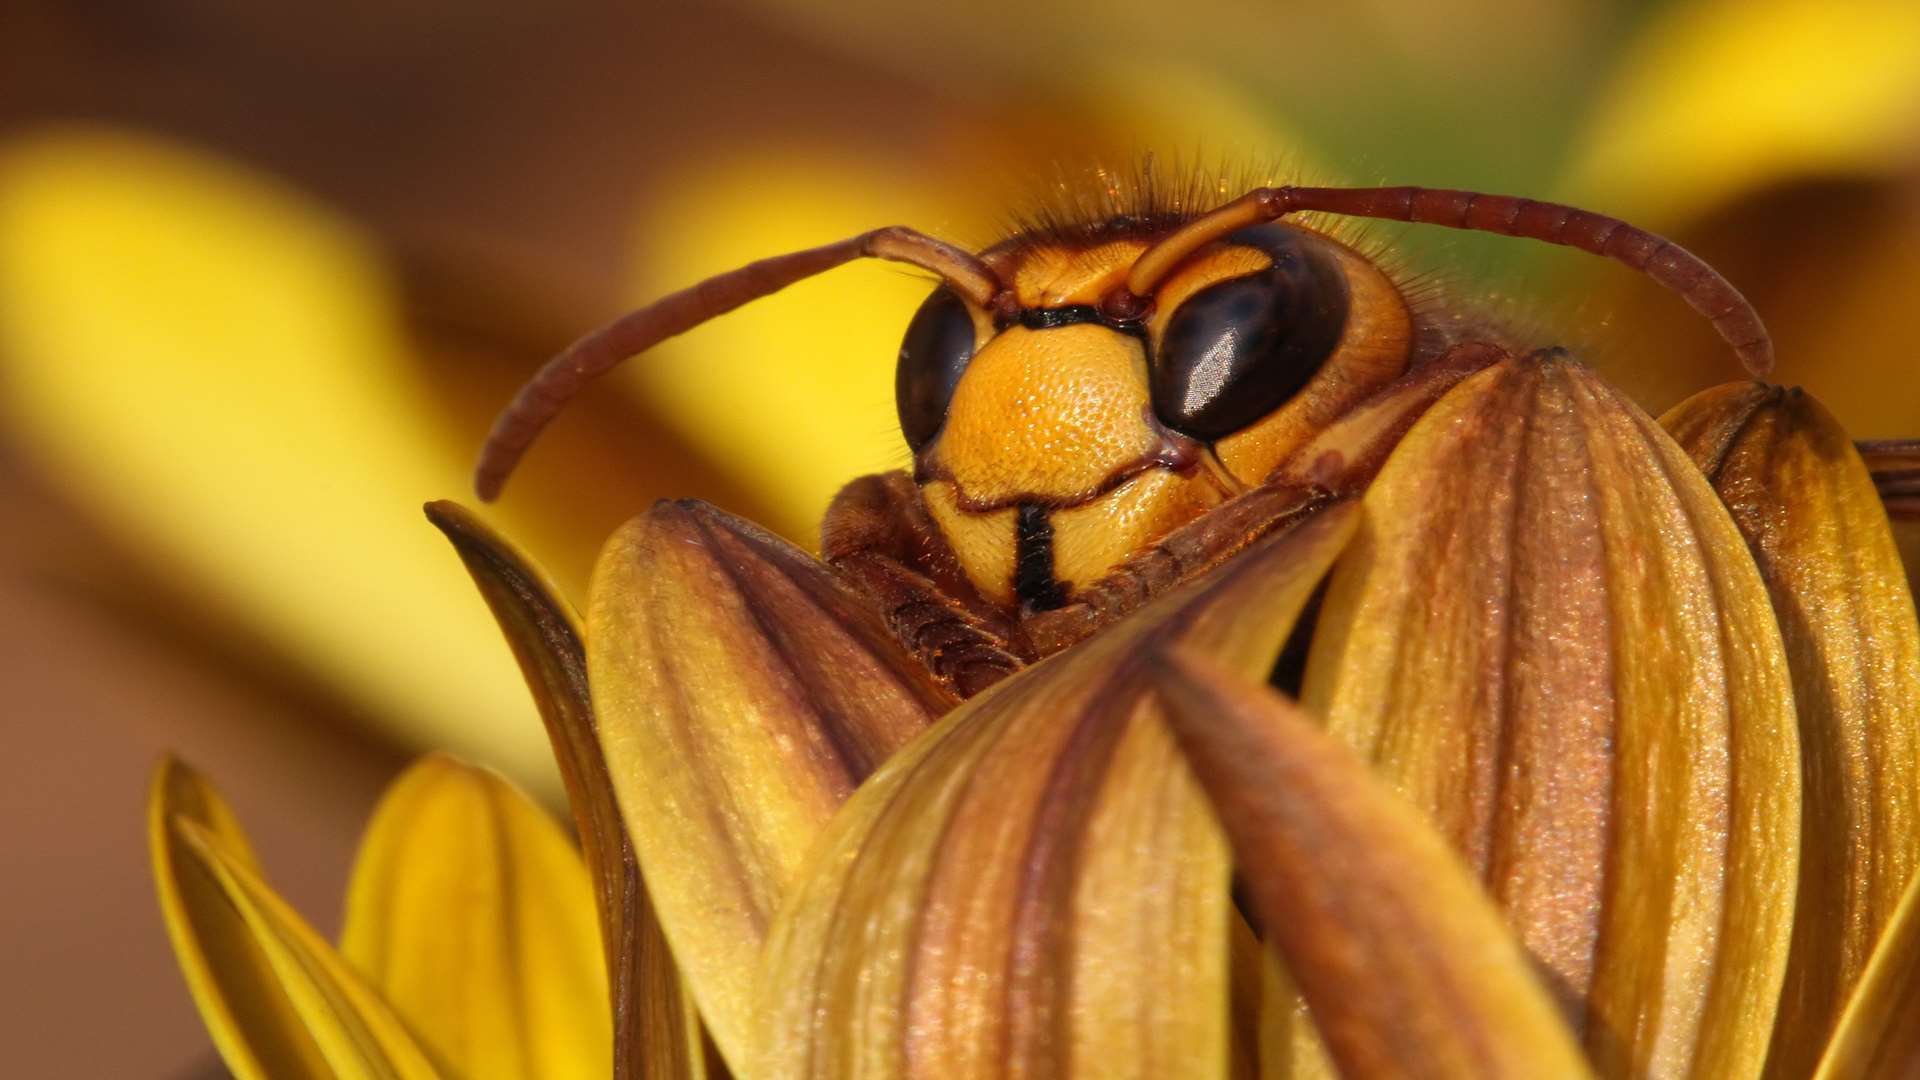 Jason Steel Kent Wildlife Trust's Wildlife Photographer Of The Year with his picture of a European hornet on a potted Cape Daisy